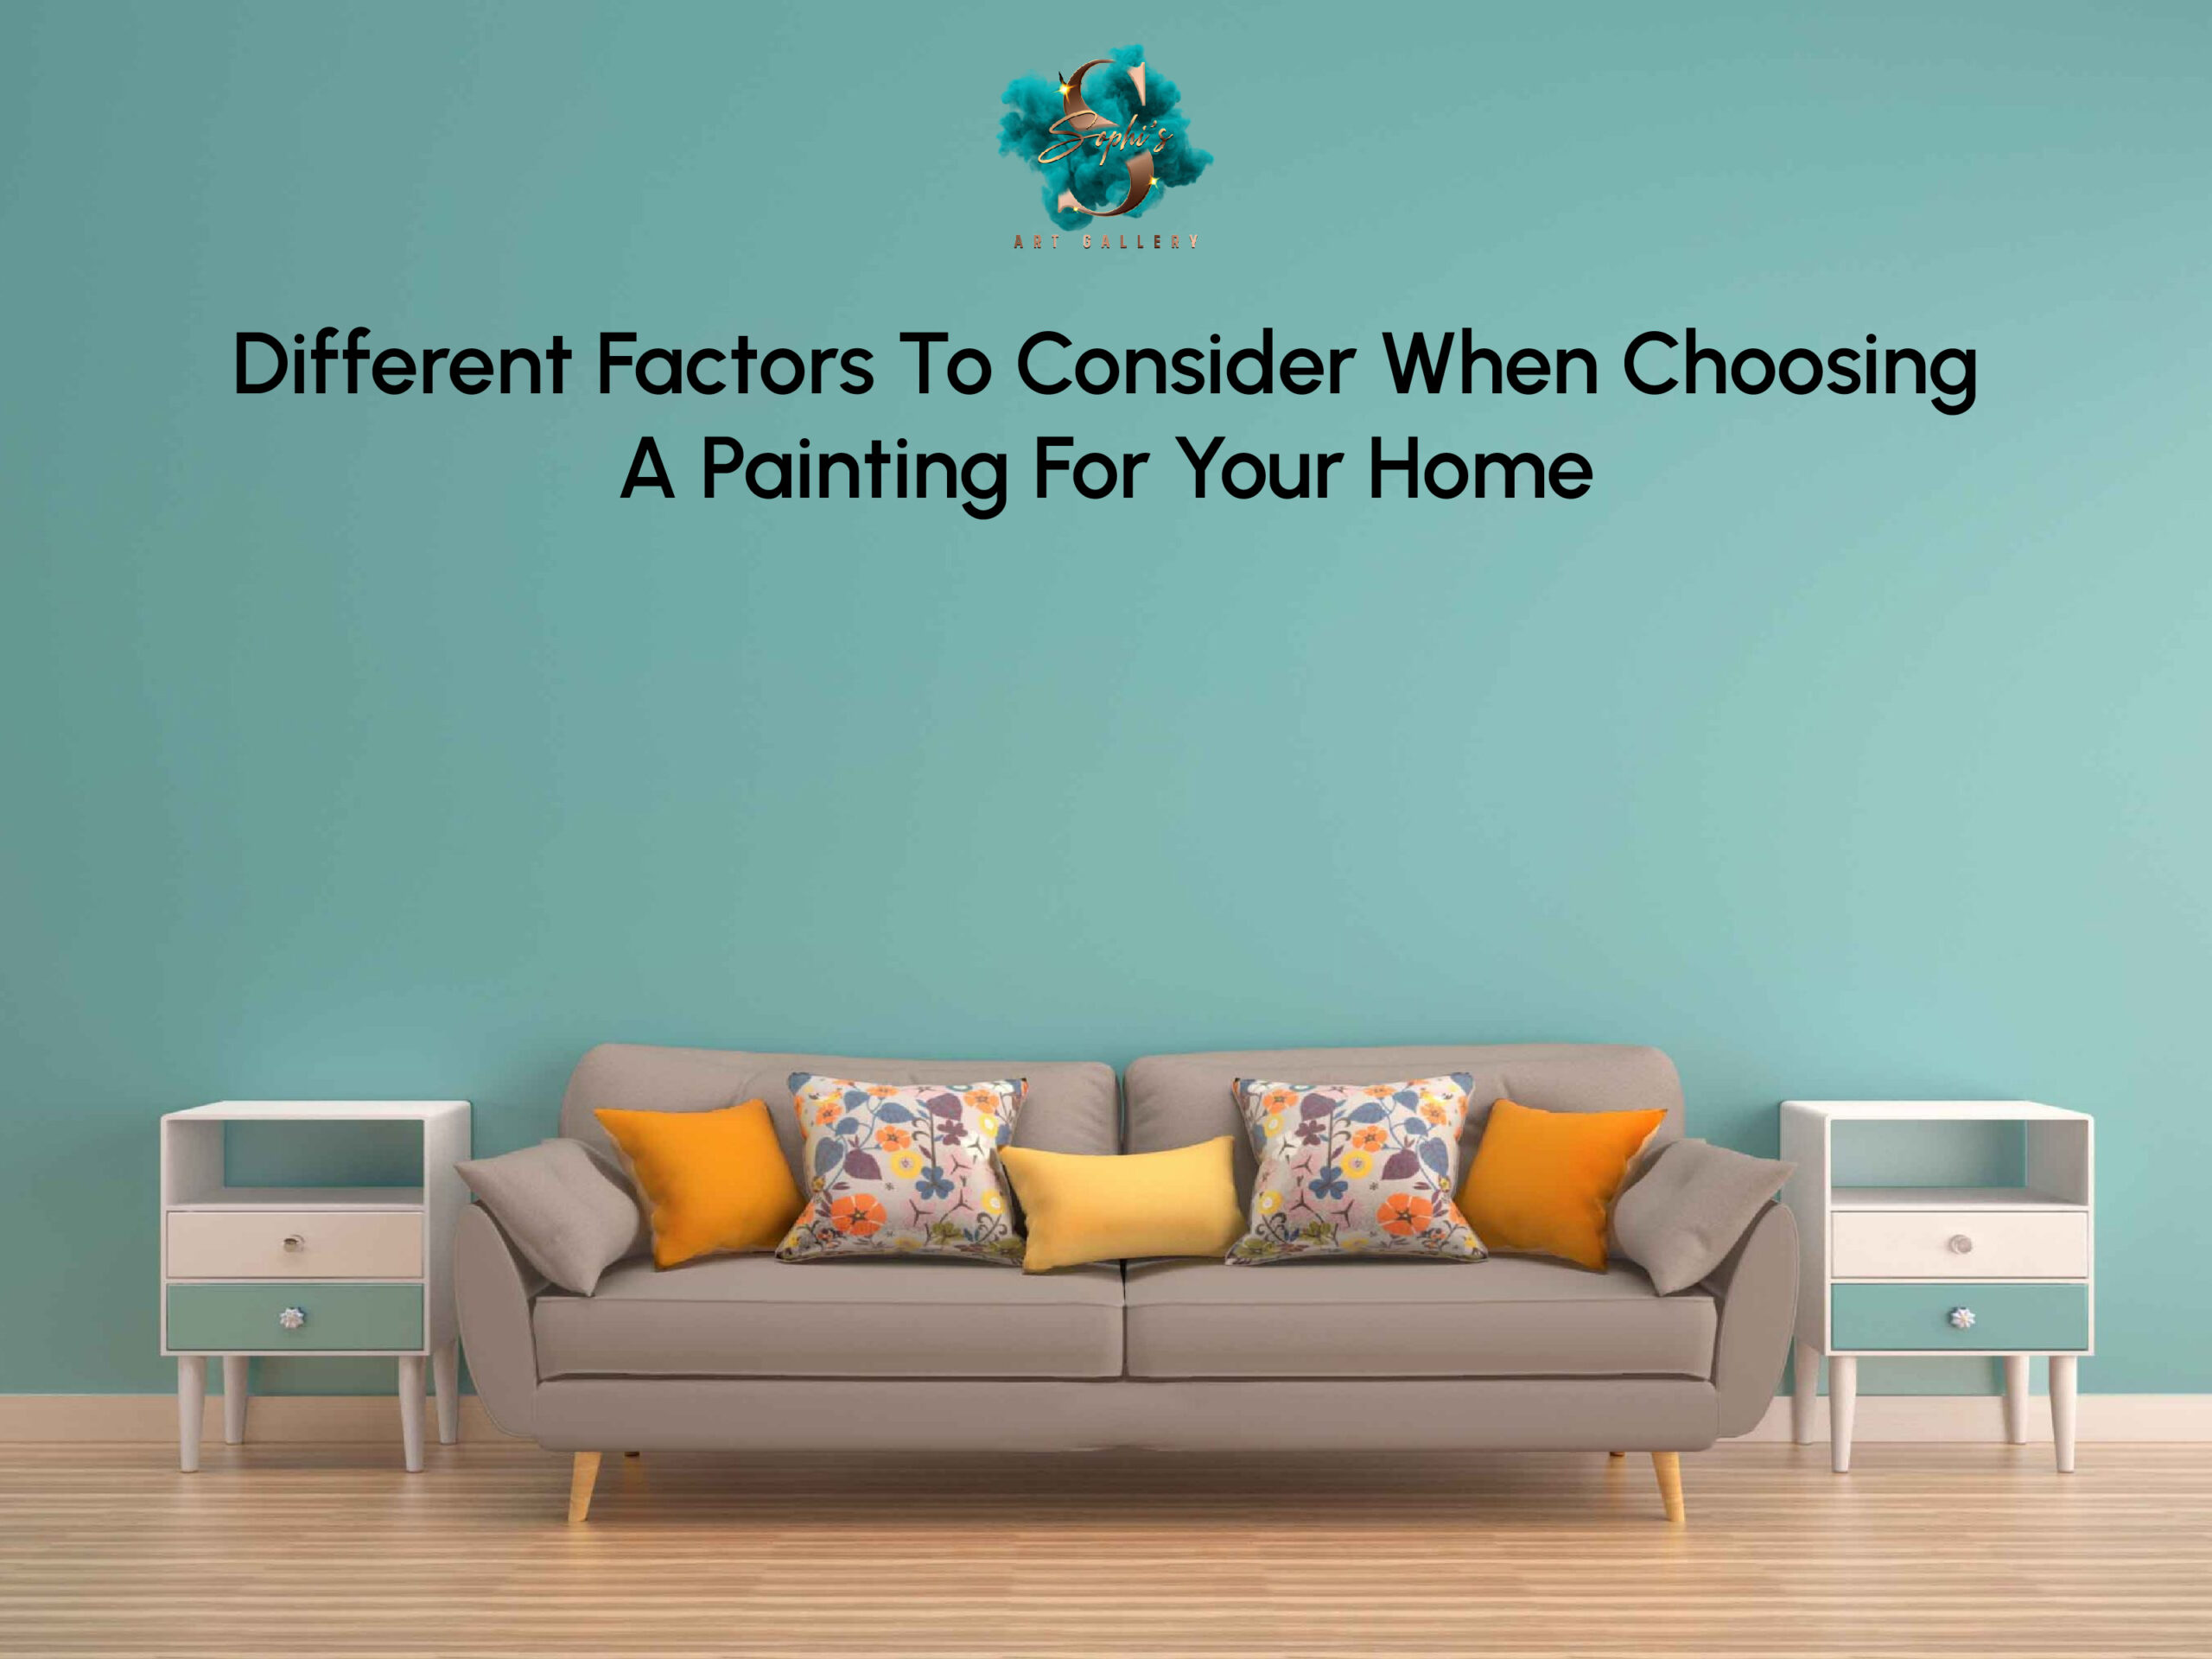 Different Factors To Consider When Choosing A Painting For Your Home